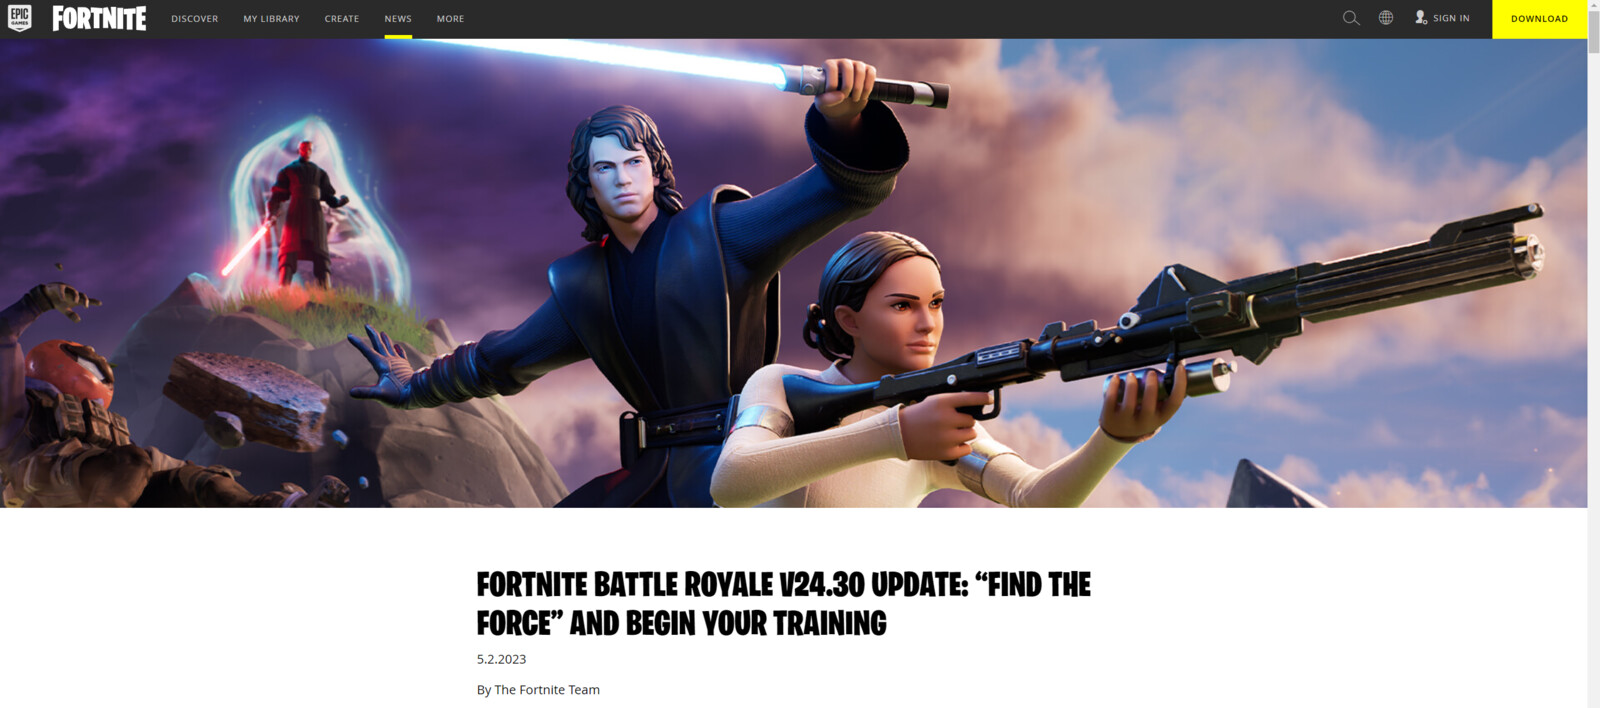 epicgames.com Article (I like this crop)